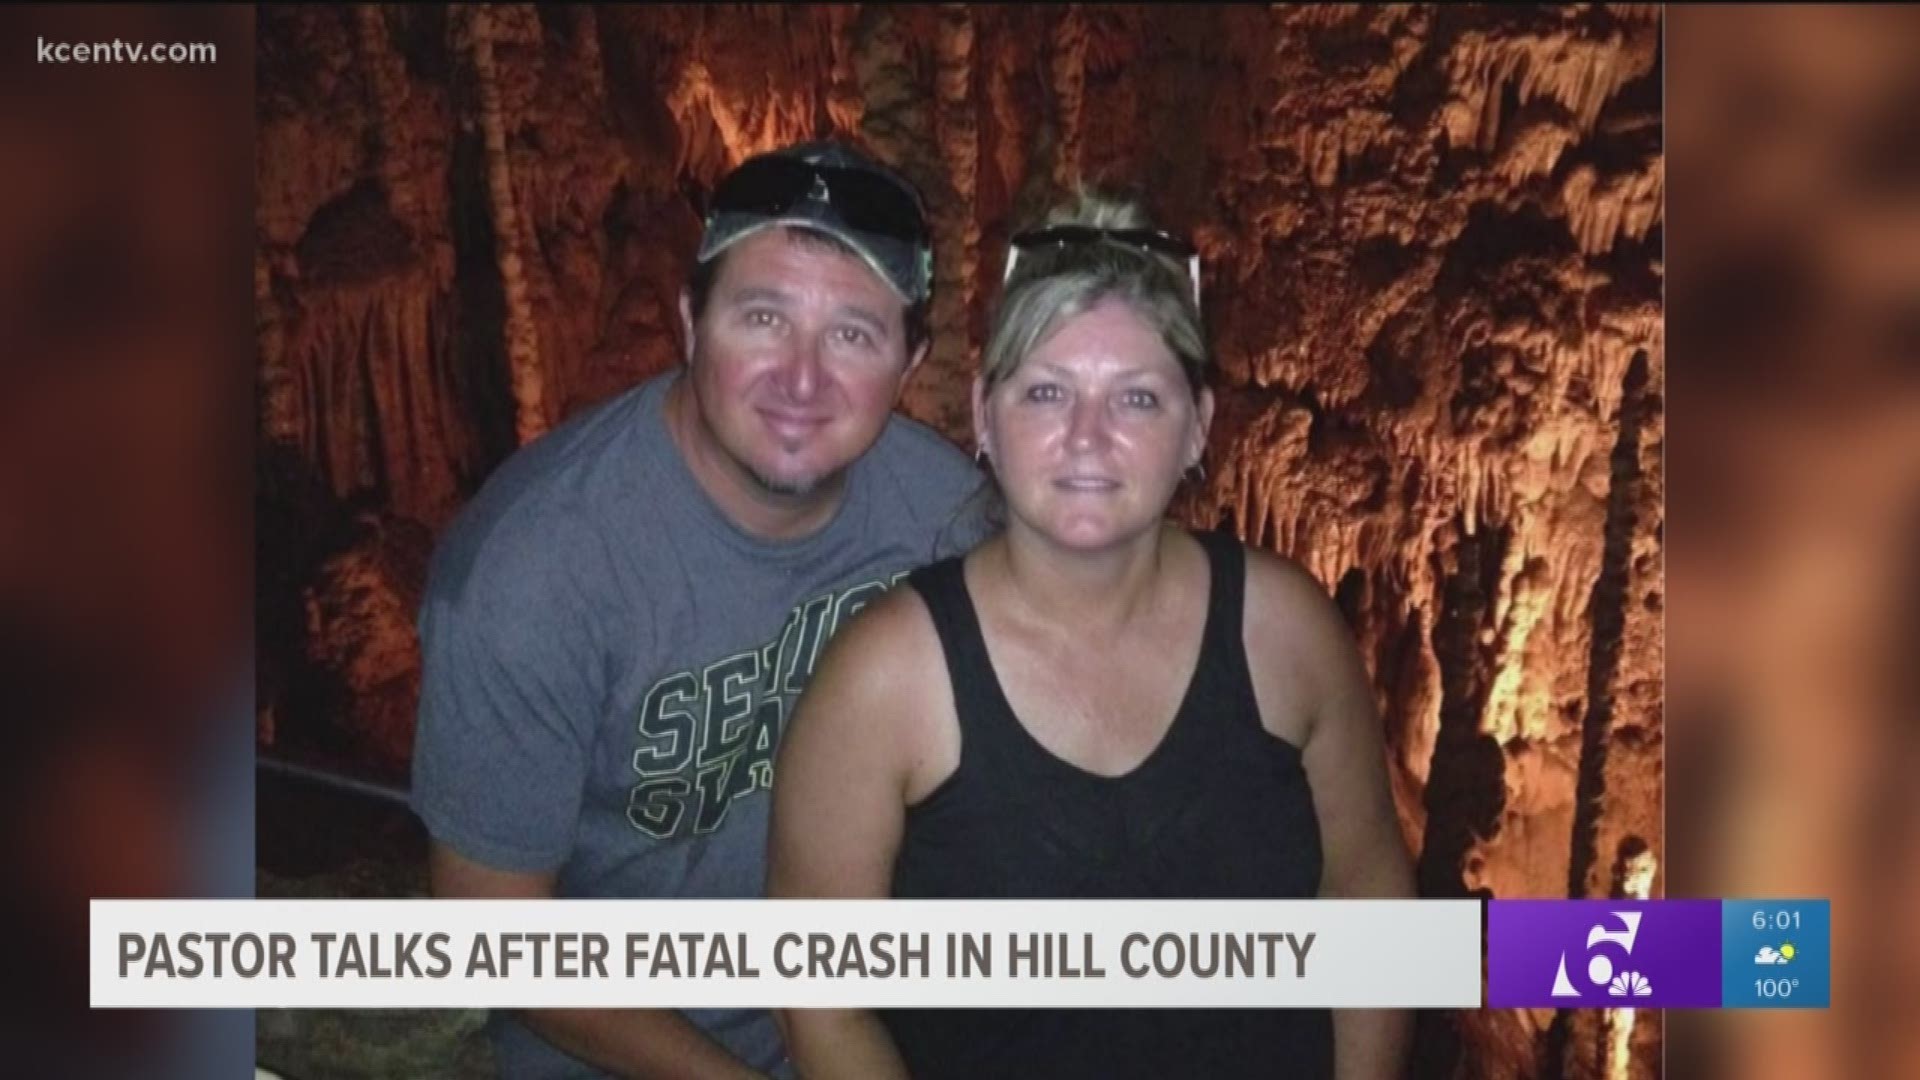 Officials say the crash happened on Highway 174 in Hill County yesterday. 